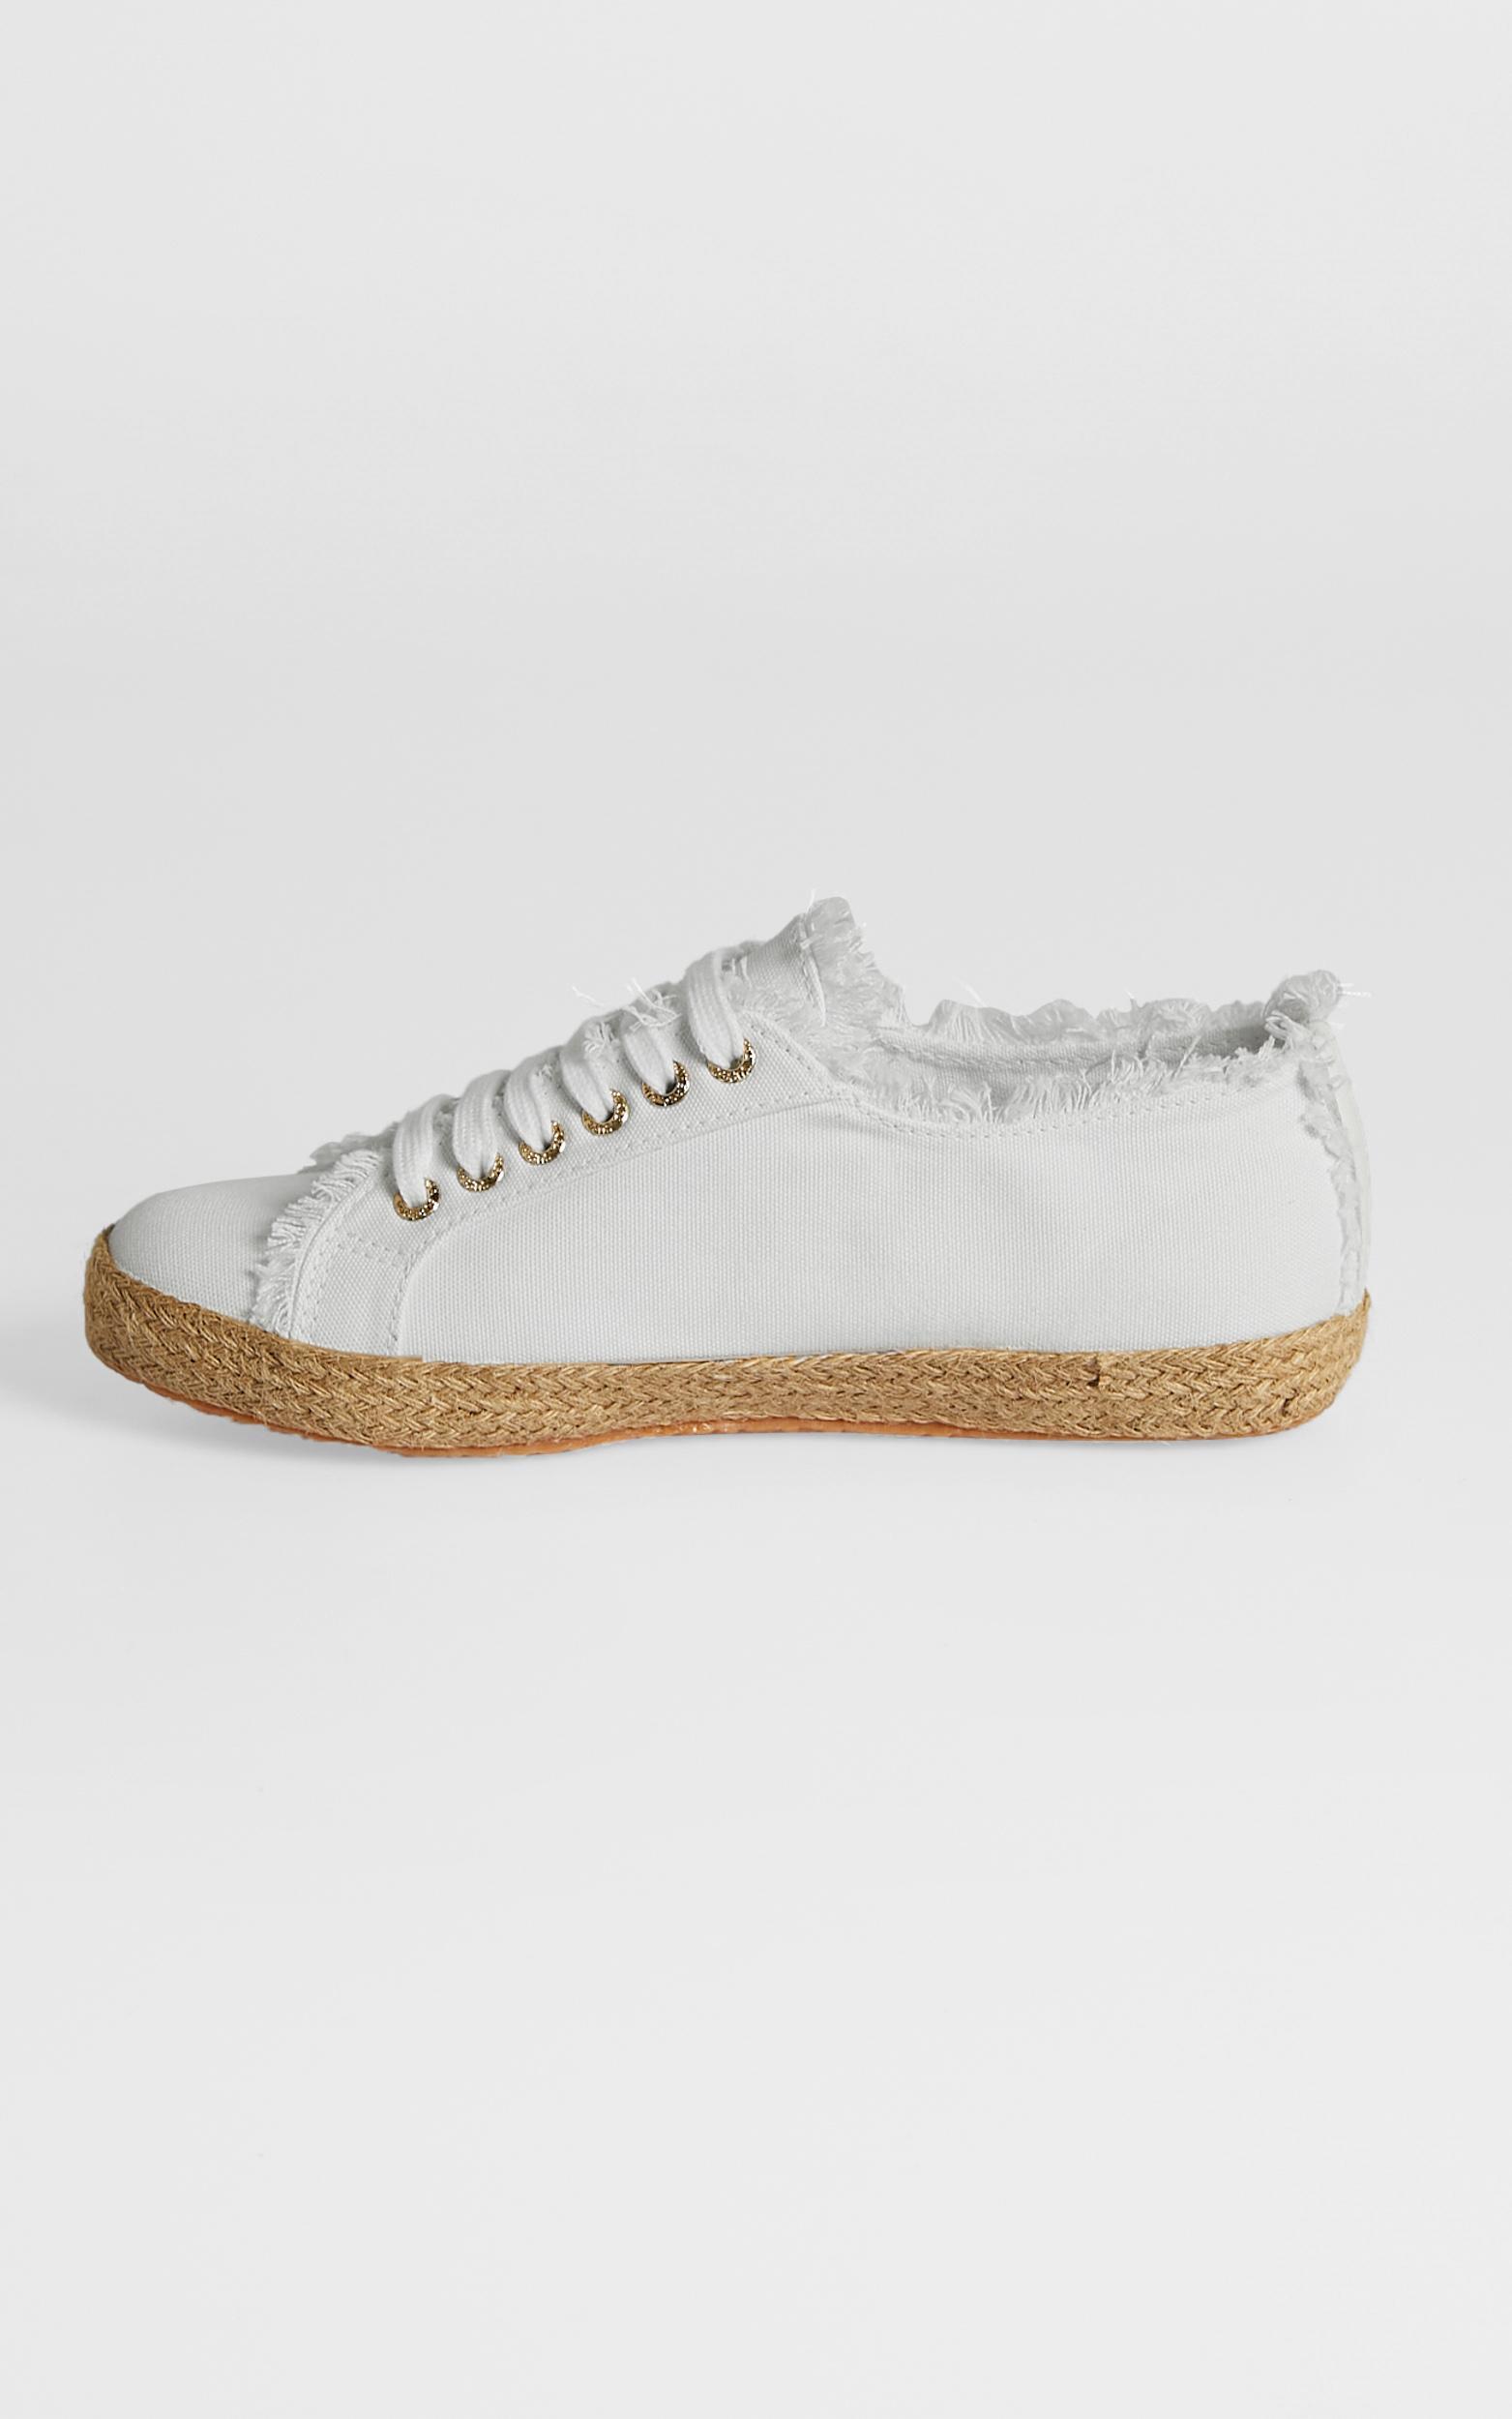 Superga - 2750 Fringed Cotton Rope Sneakers in 901 White | Showpo